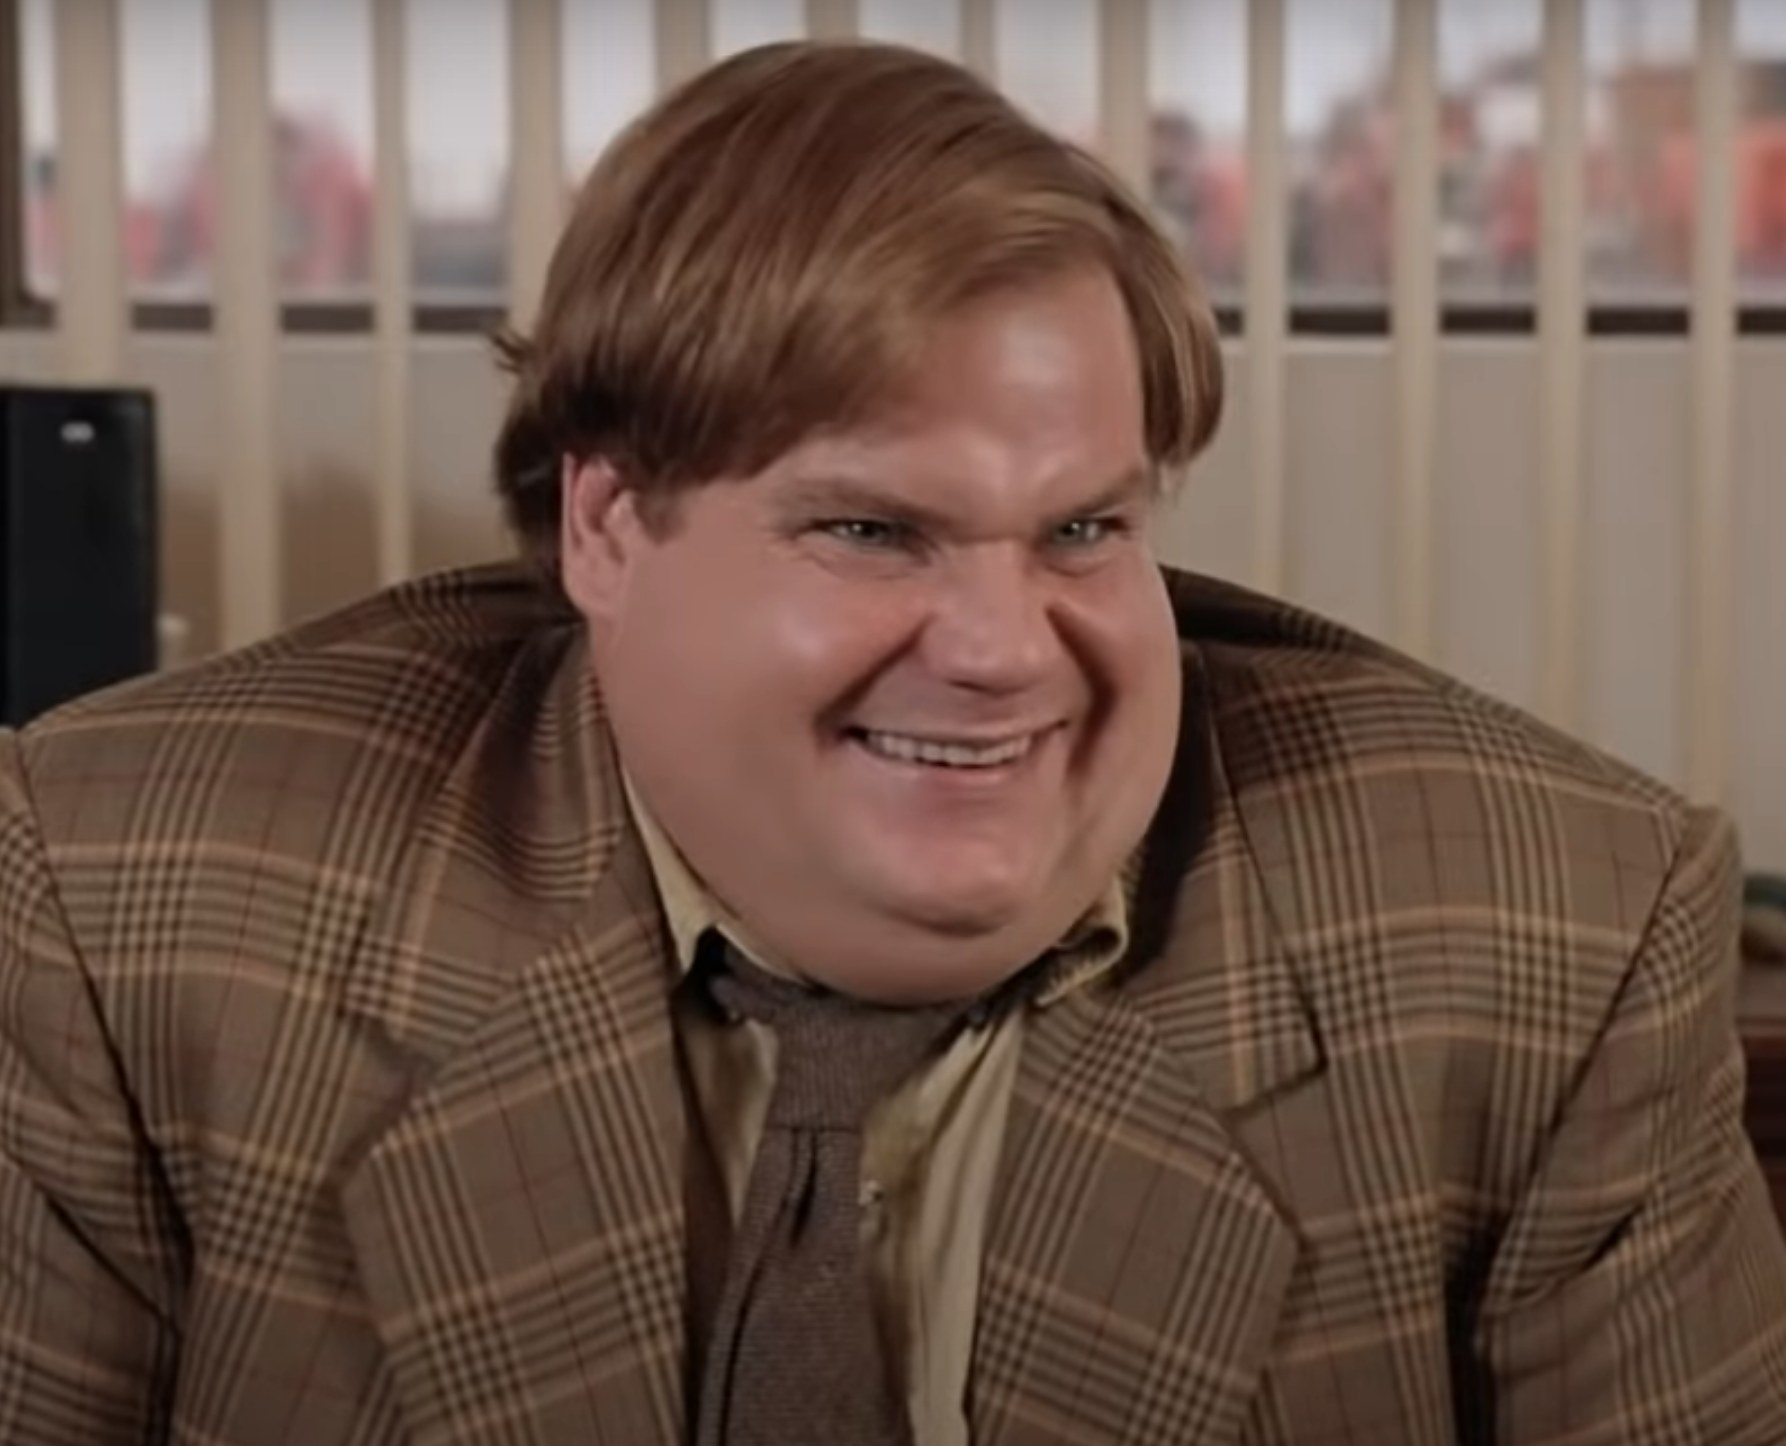 Chris Farley as Tommy laughs after he tells a joke during a work meeting